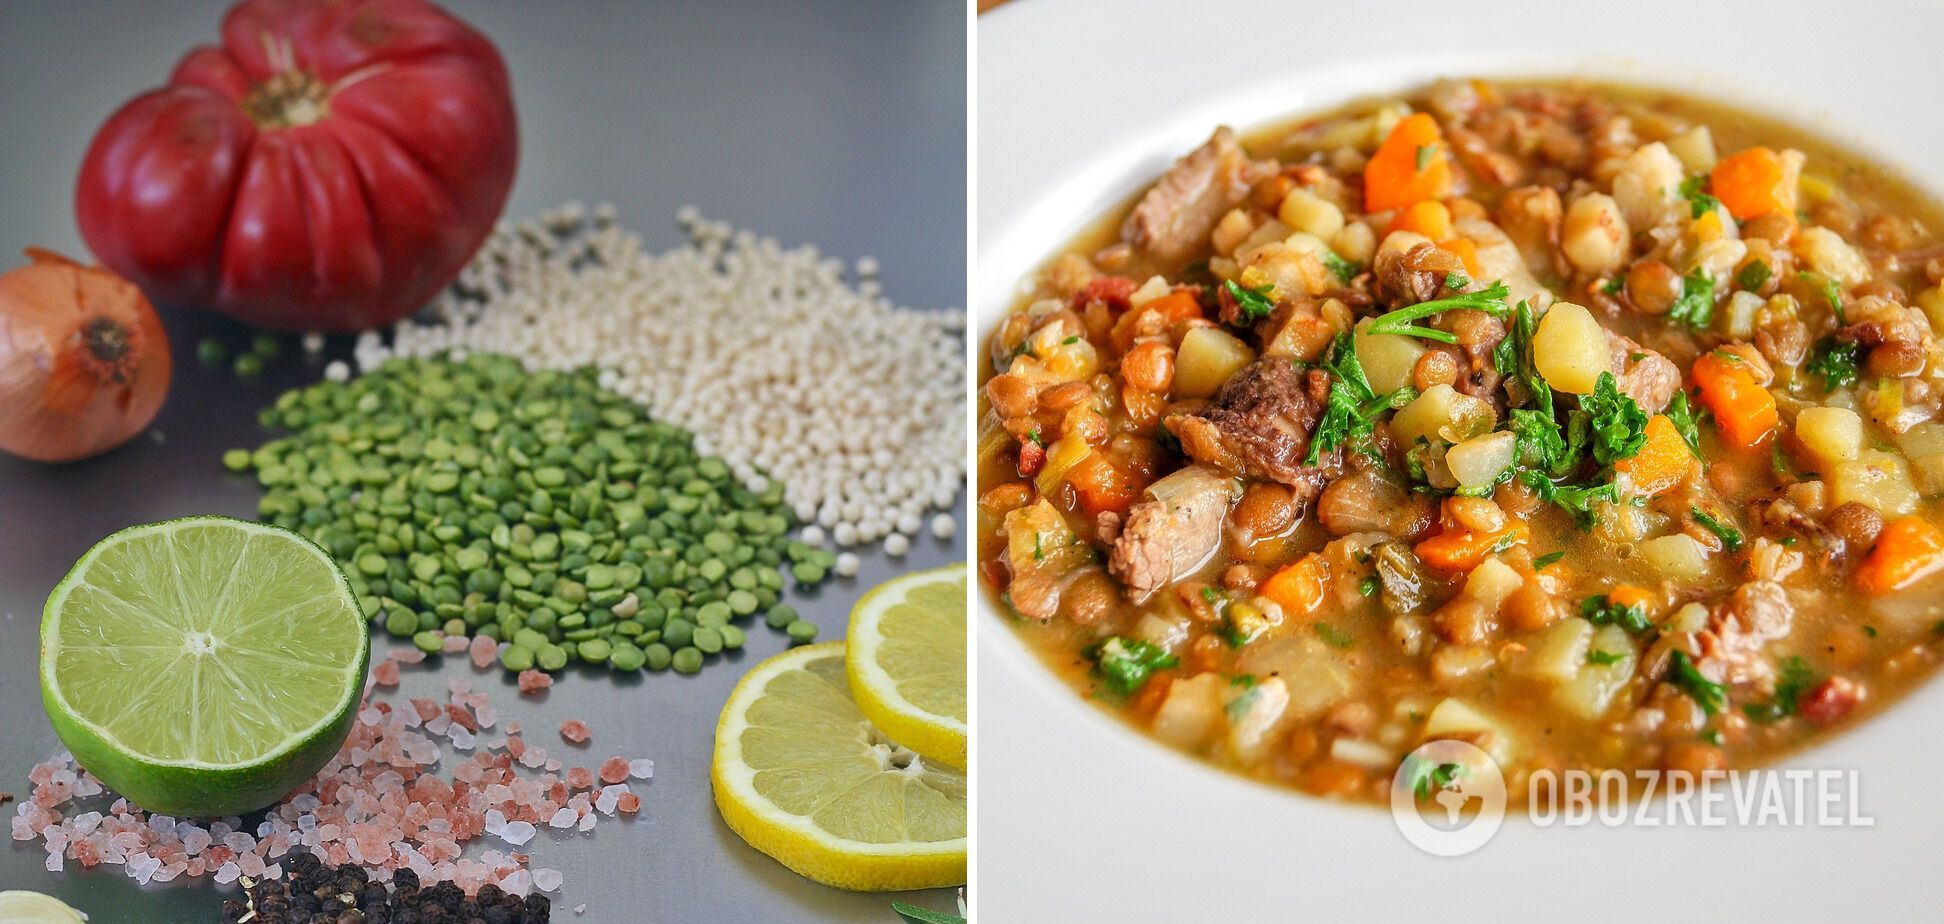 What to cook with lentils